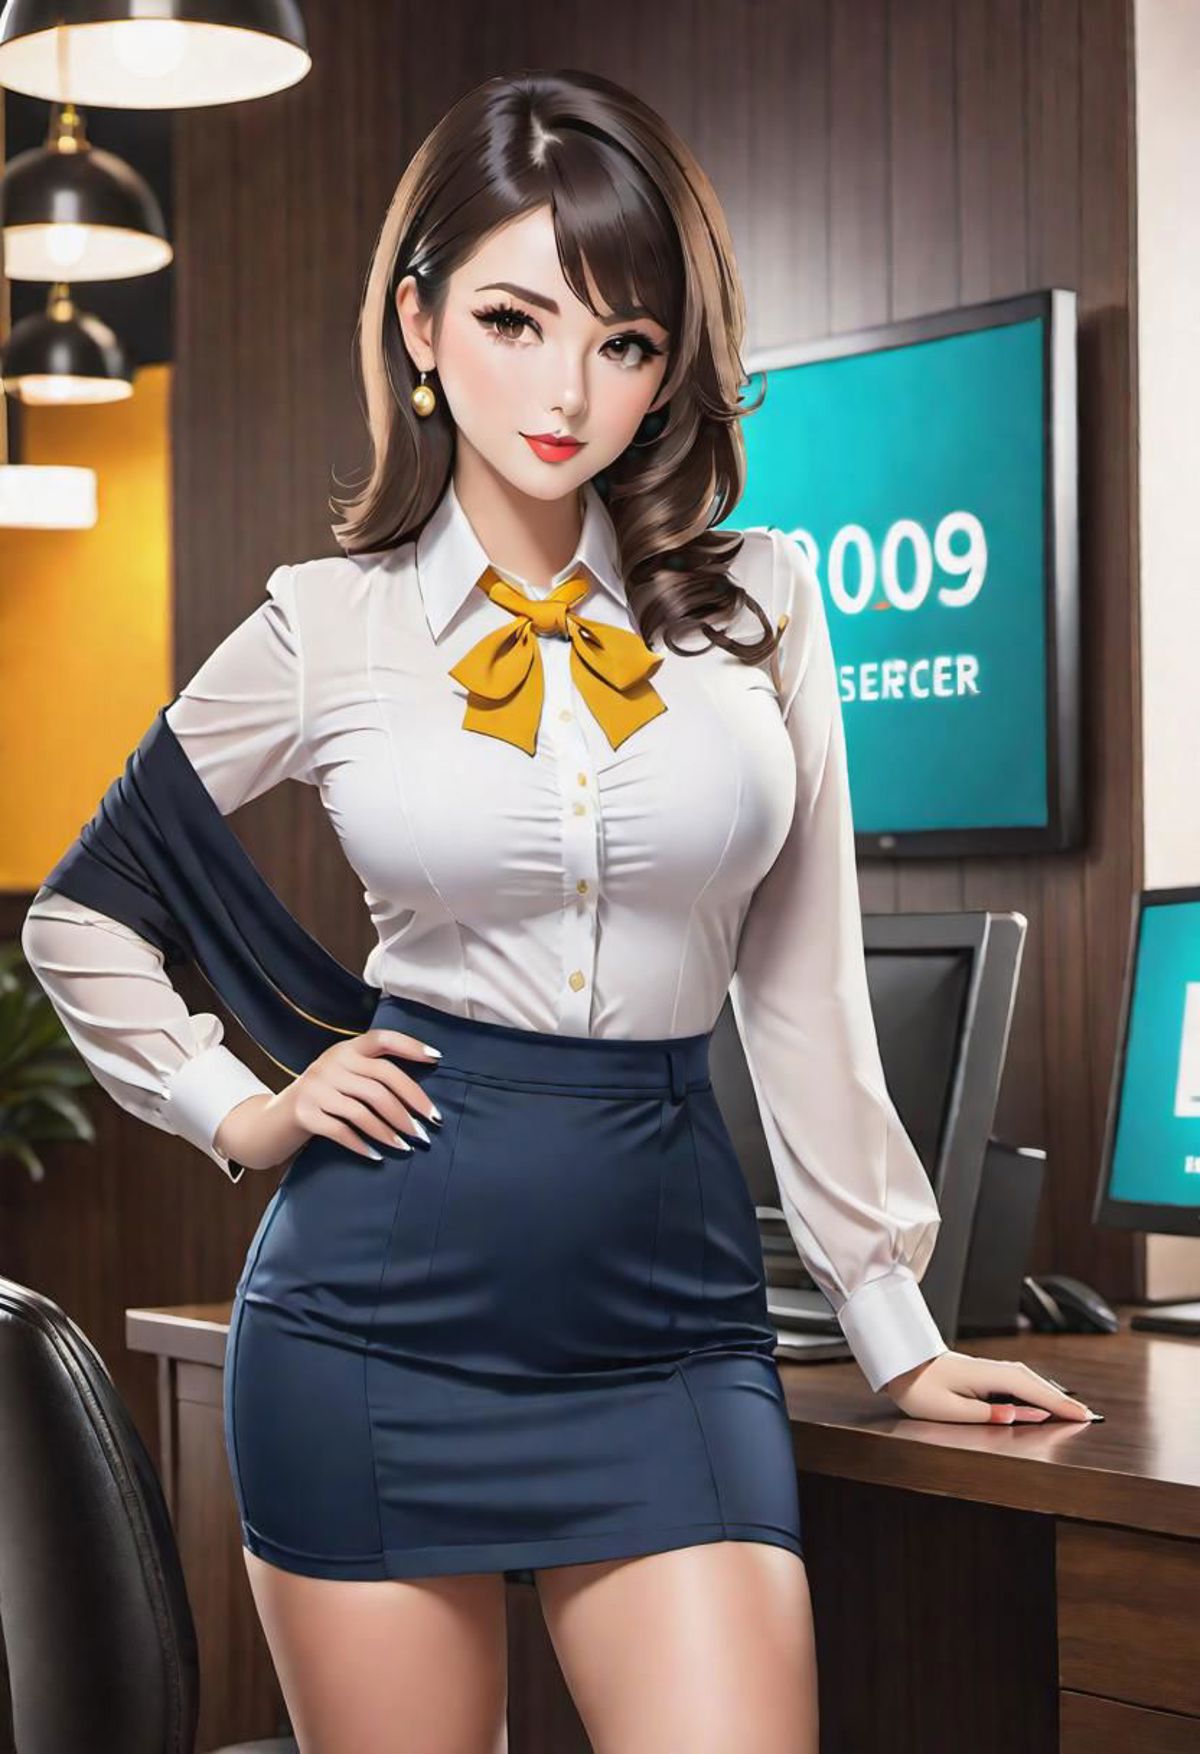 AI model image by 6388455